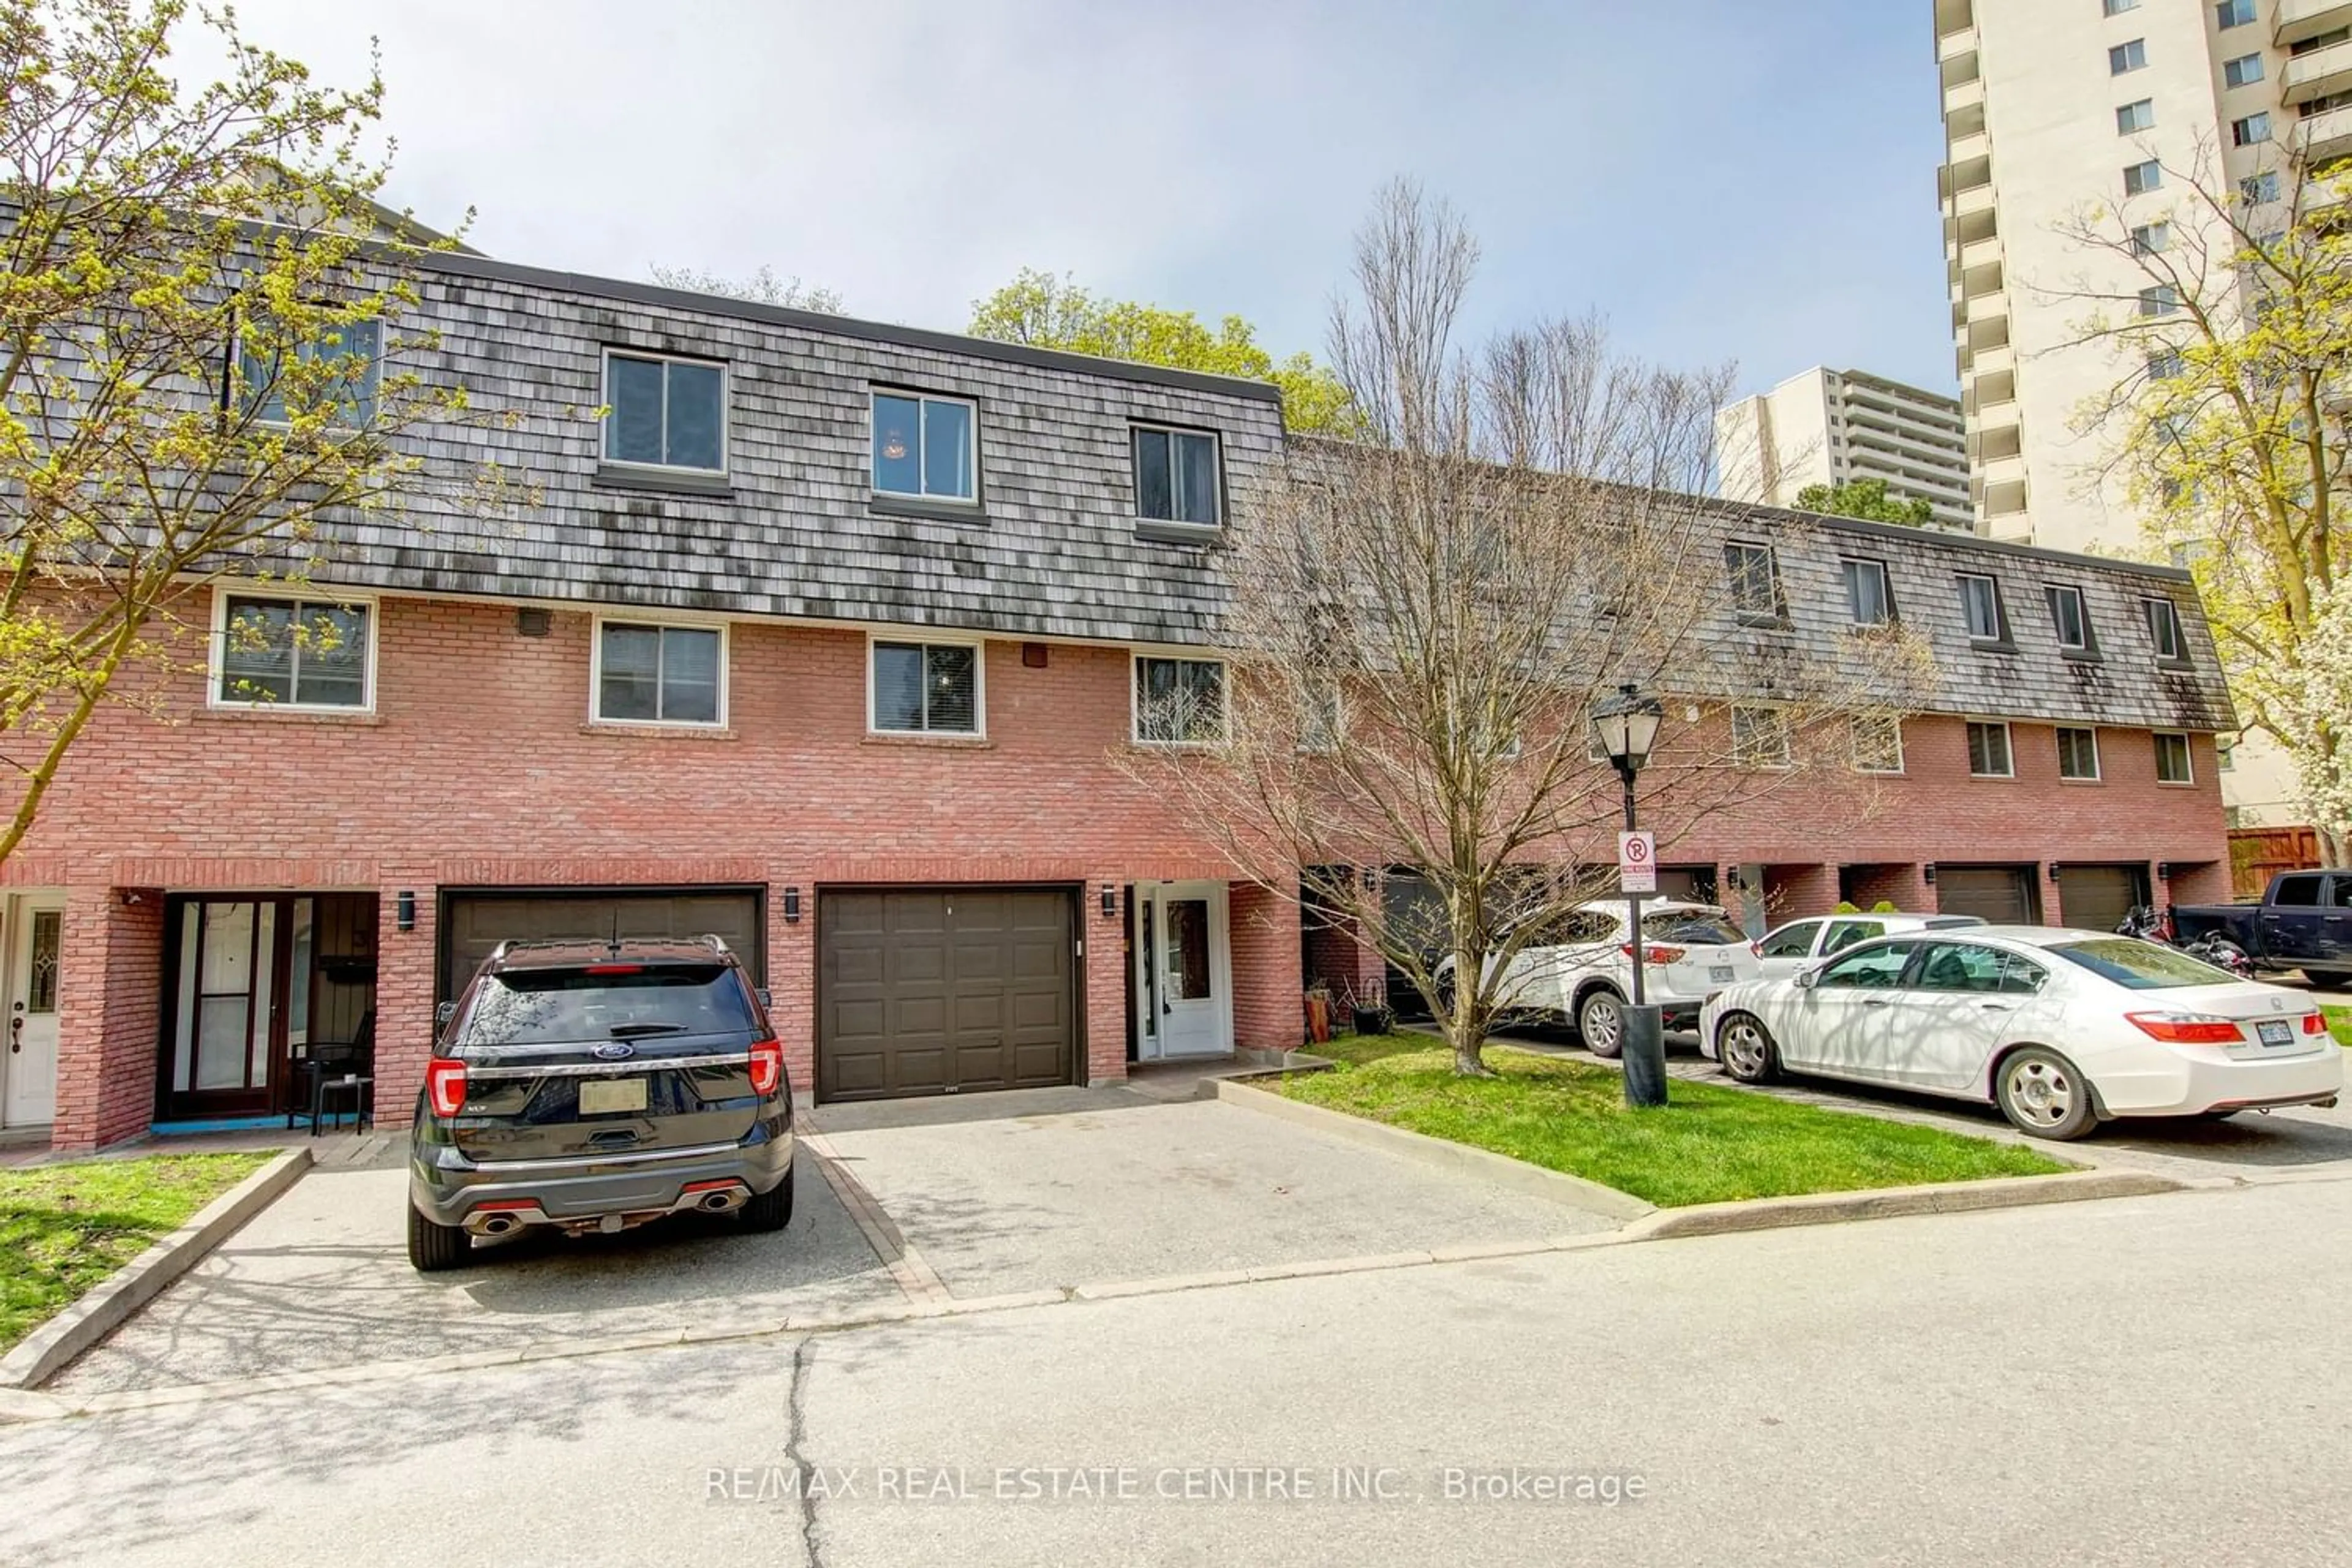 A pic from exterior of the house or condo for 2145 Sherobee Rd #4, Mississauga Ontario L5A 3G8